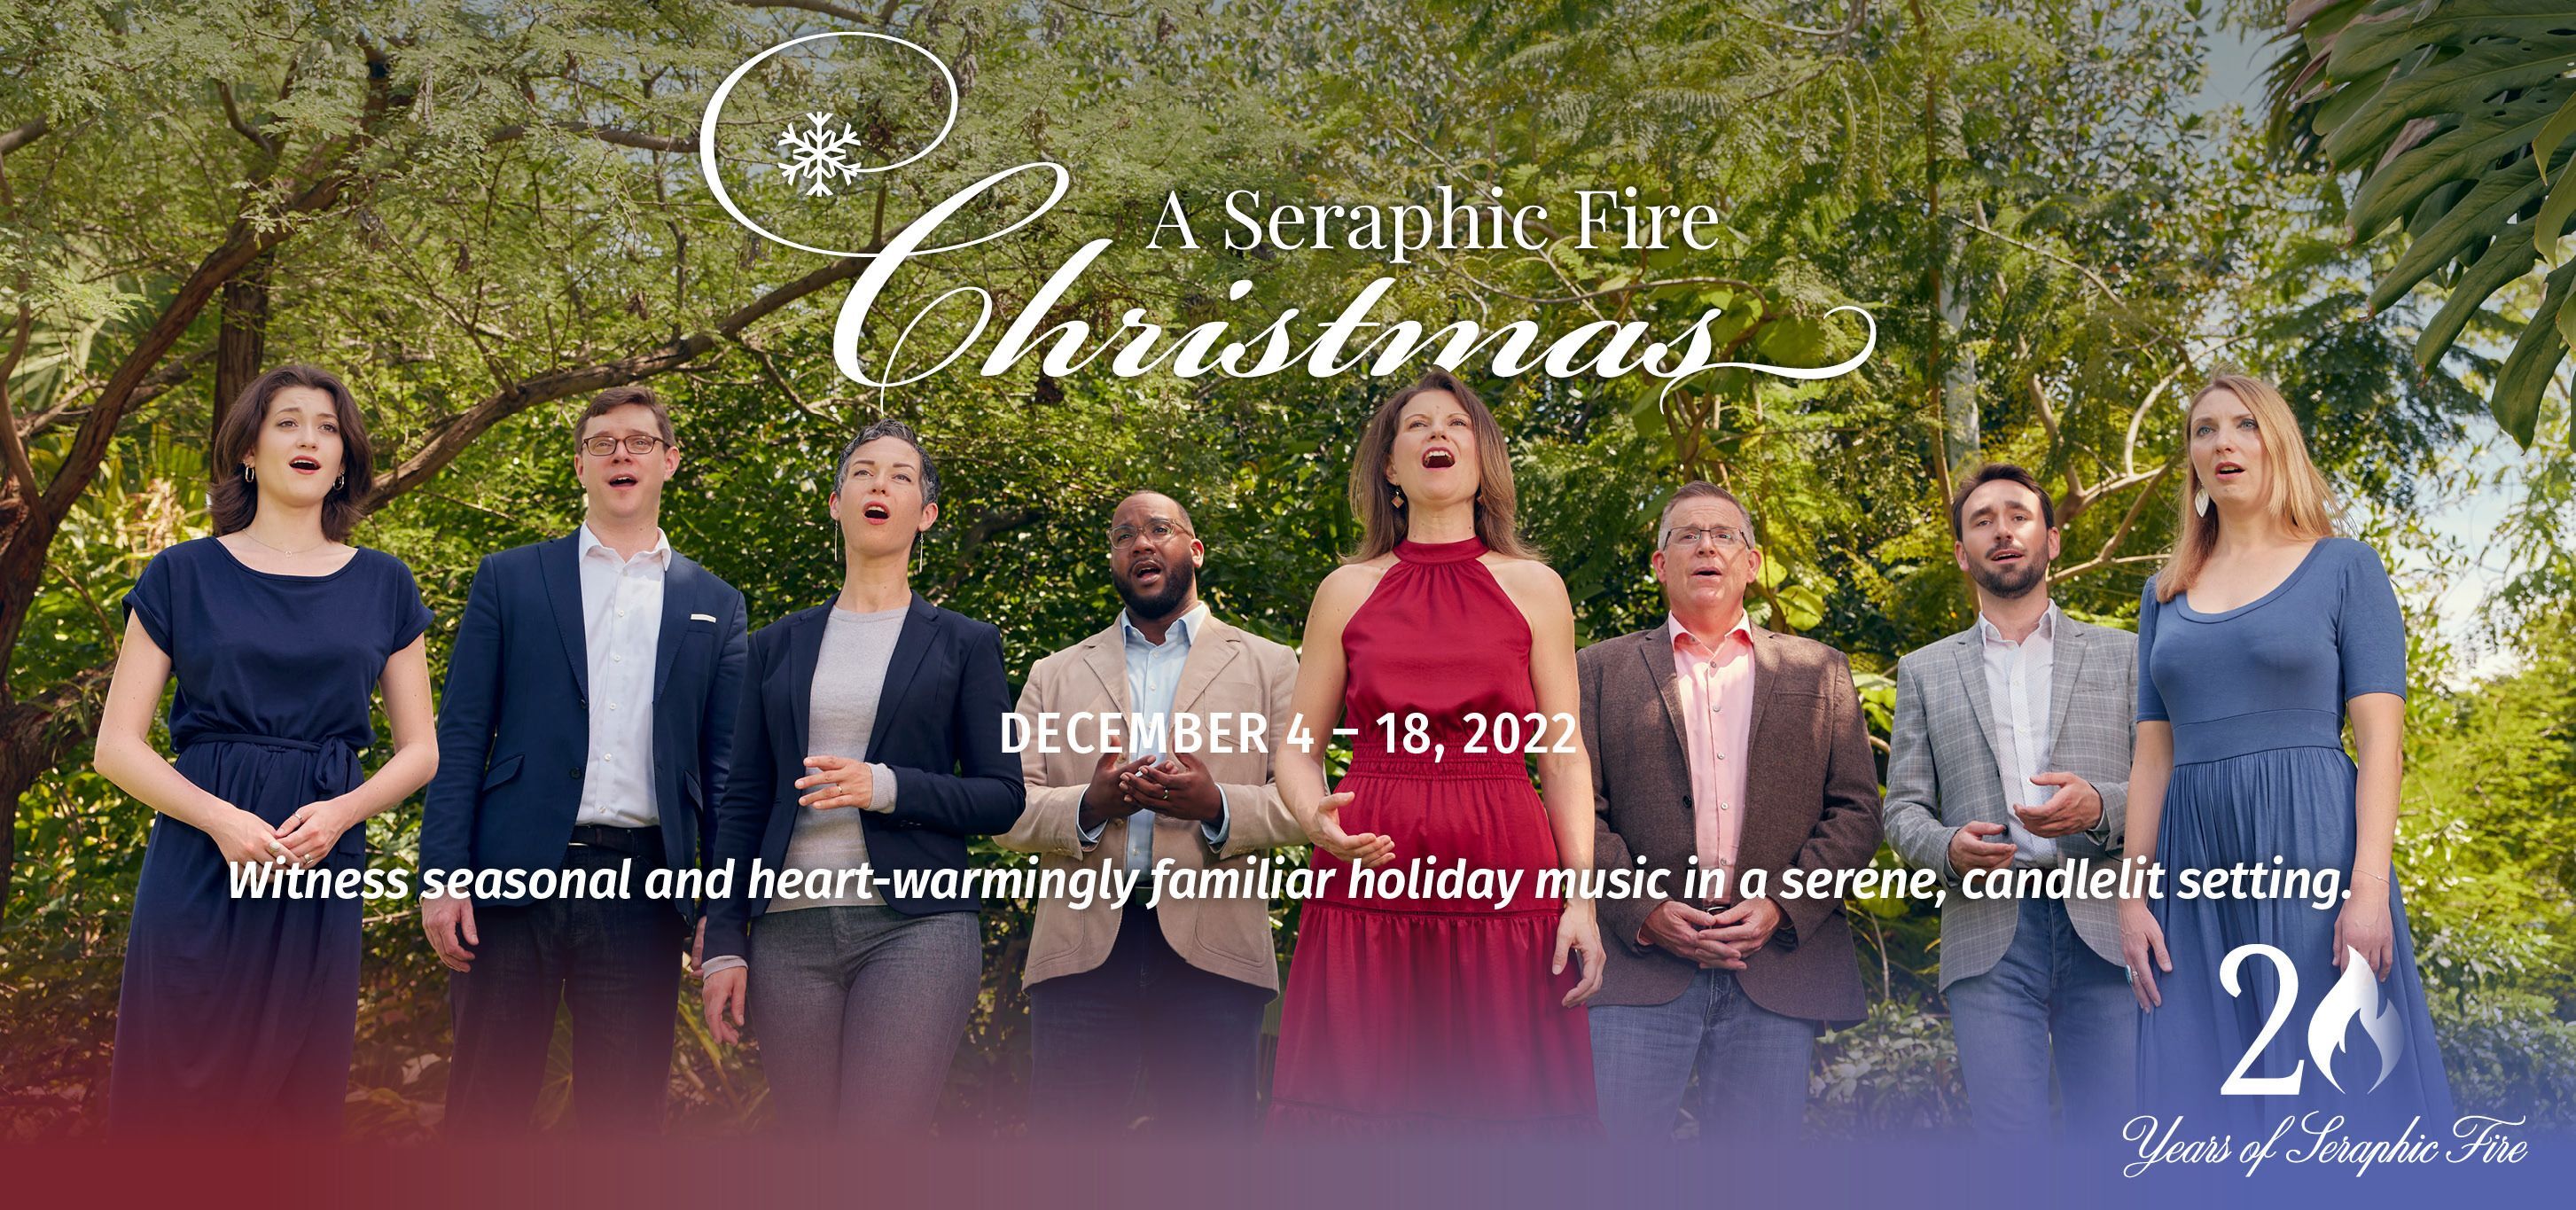 A Christmas Tradition: Seraphic Fire’s A Capella Carols by Candlelight